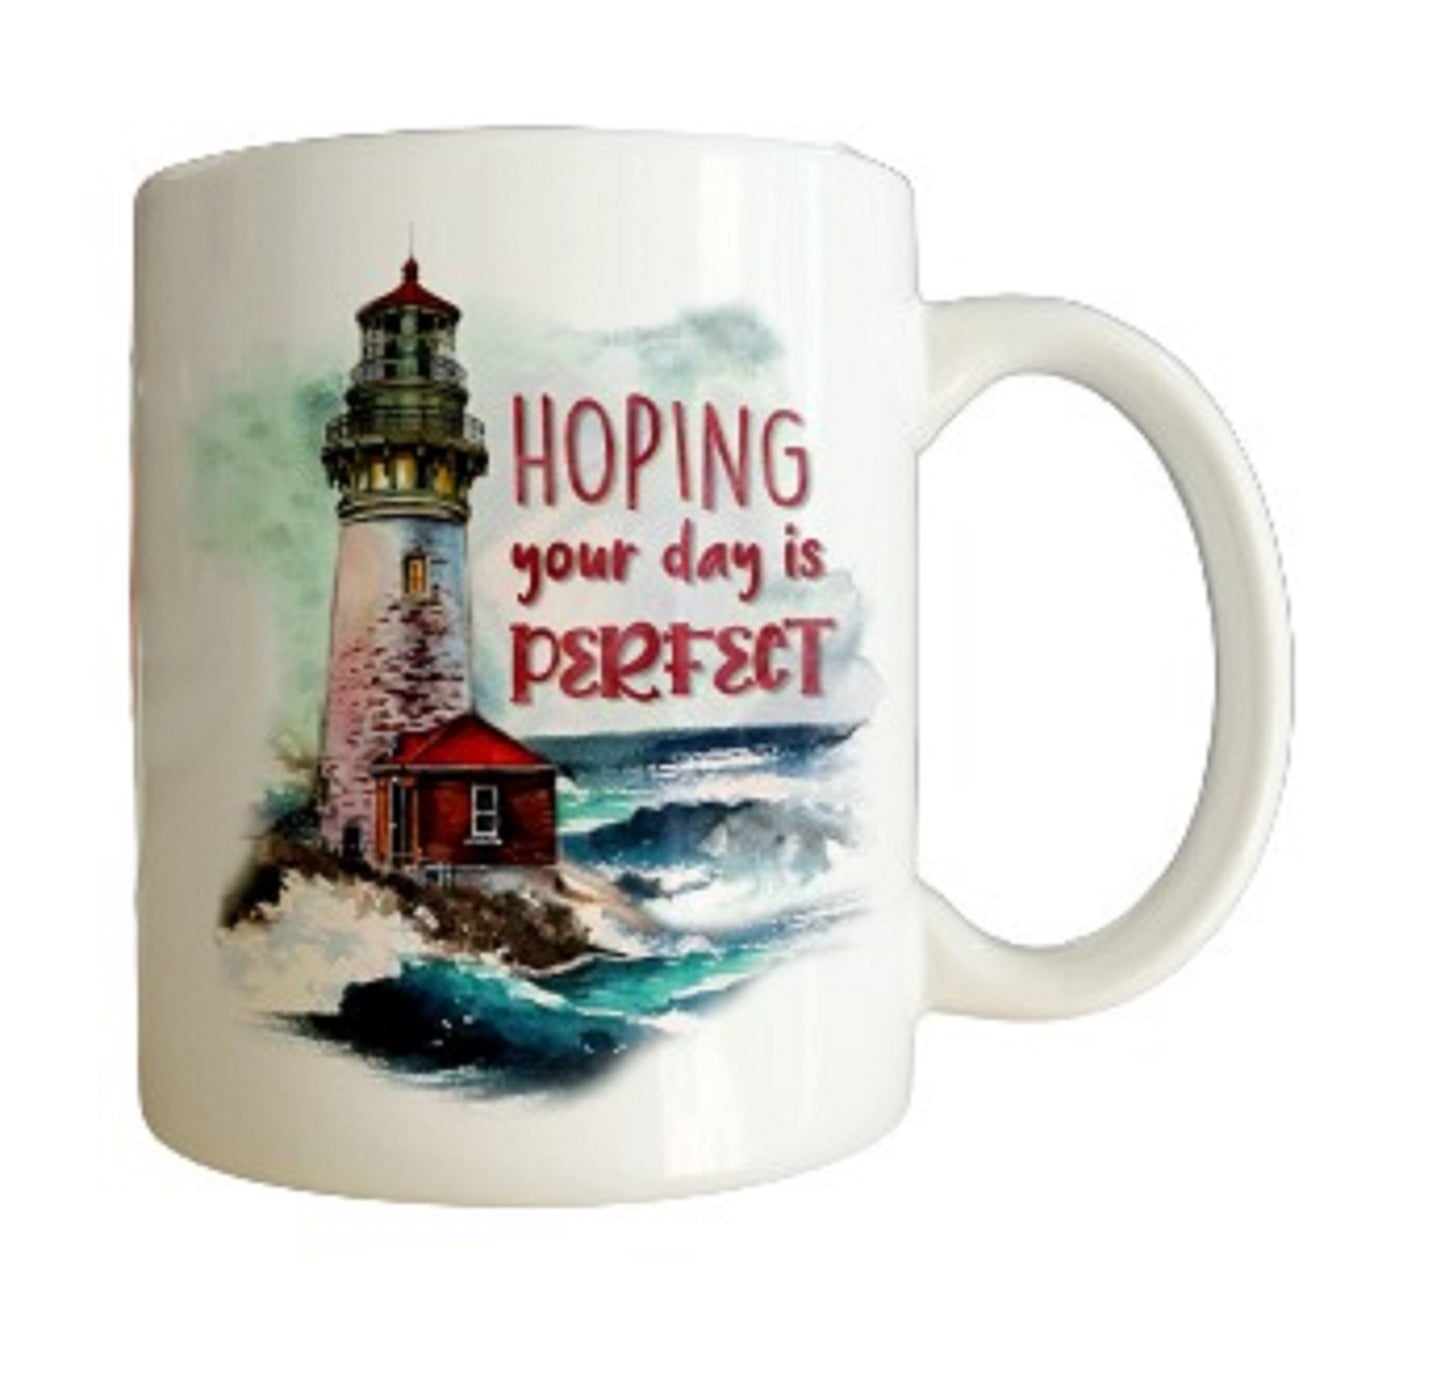  Hoping Your Day is Perfect Lighthouse Mug by Free Spirit Accessories sold by Free Spirit Accessories